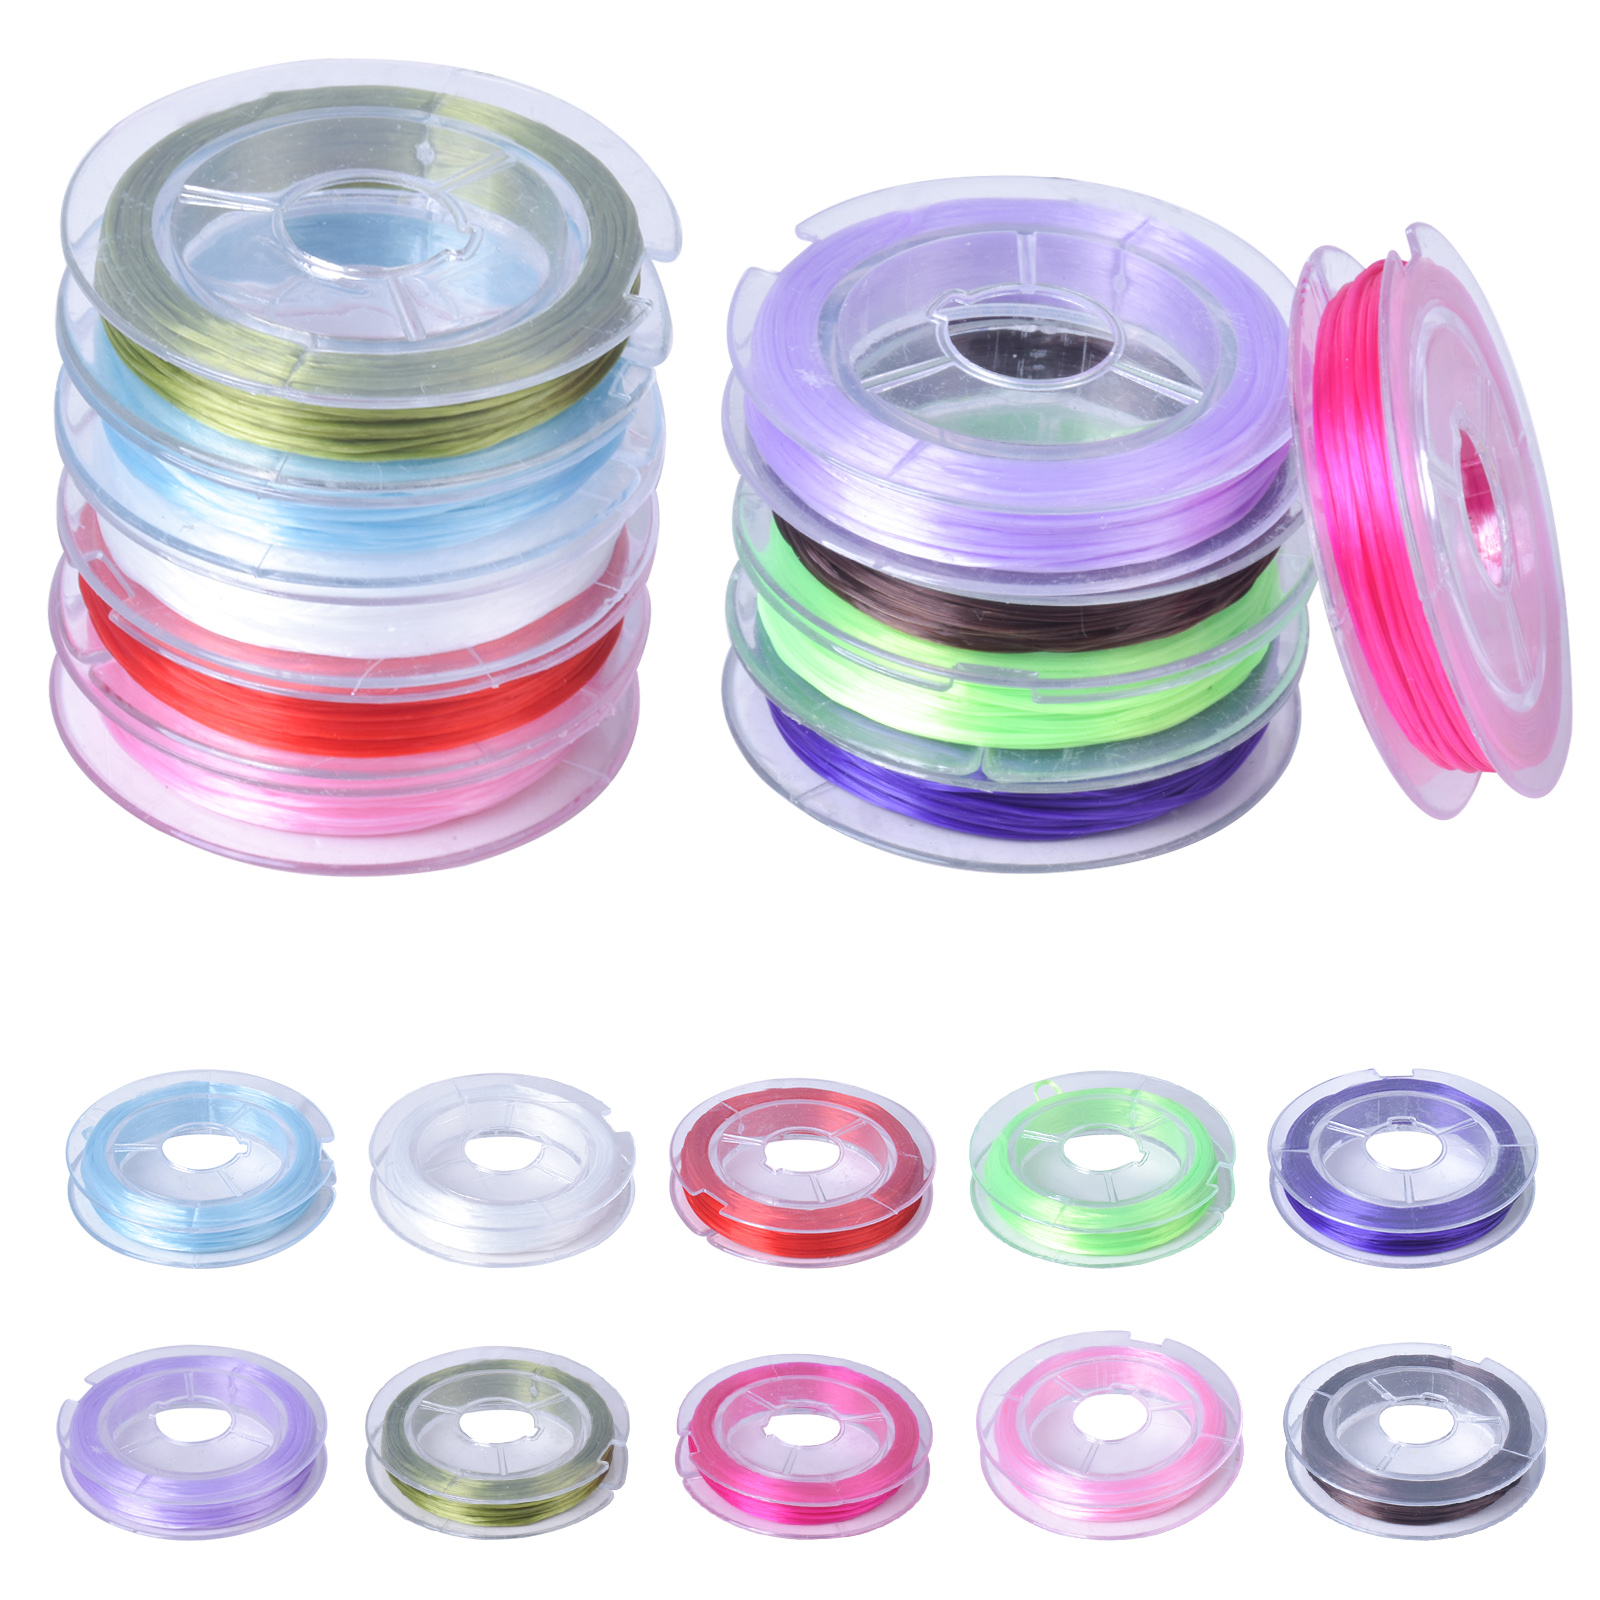 1 Roll Elastic Cord For Diy Making Beaded Bracelets, A Variety Of 4 Colors,  Approx. 10m Per Roll